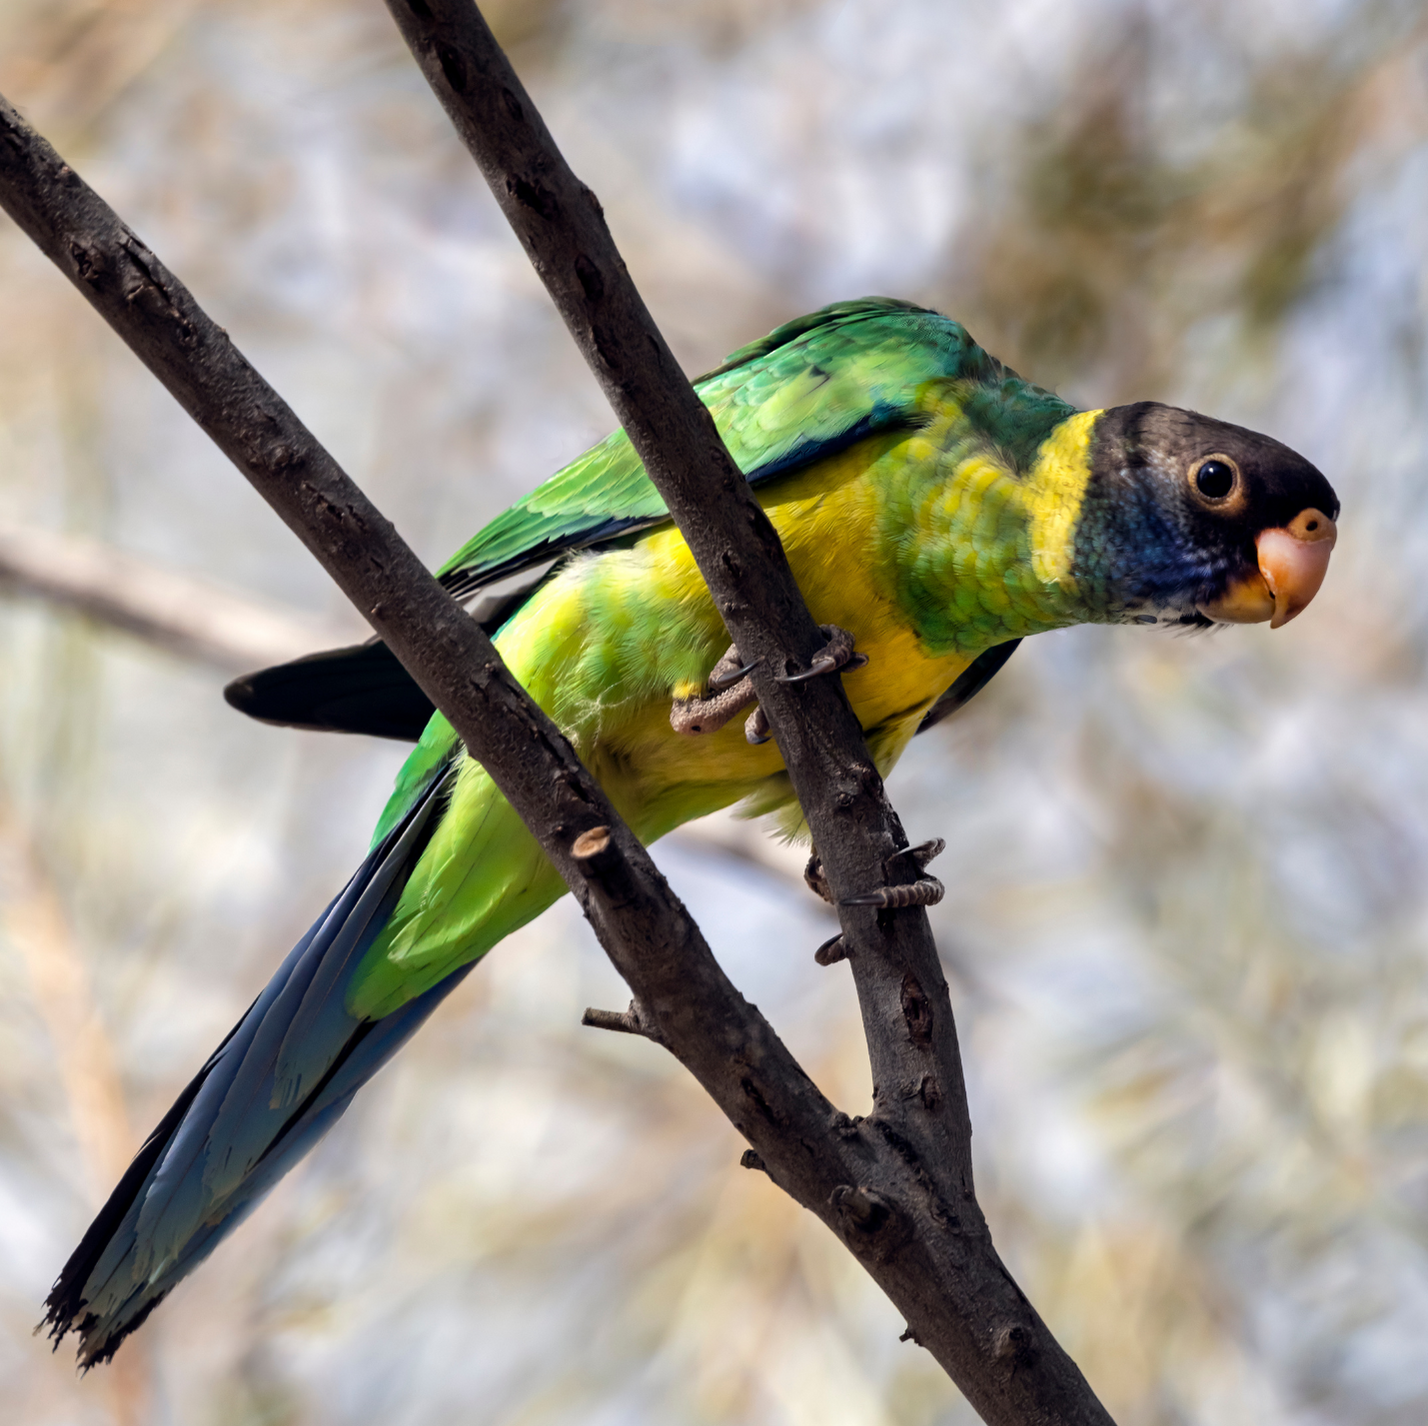 A green and yellow parrot perched on a tree branch